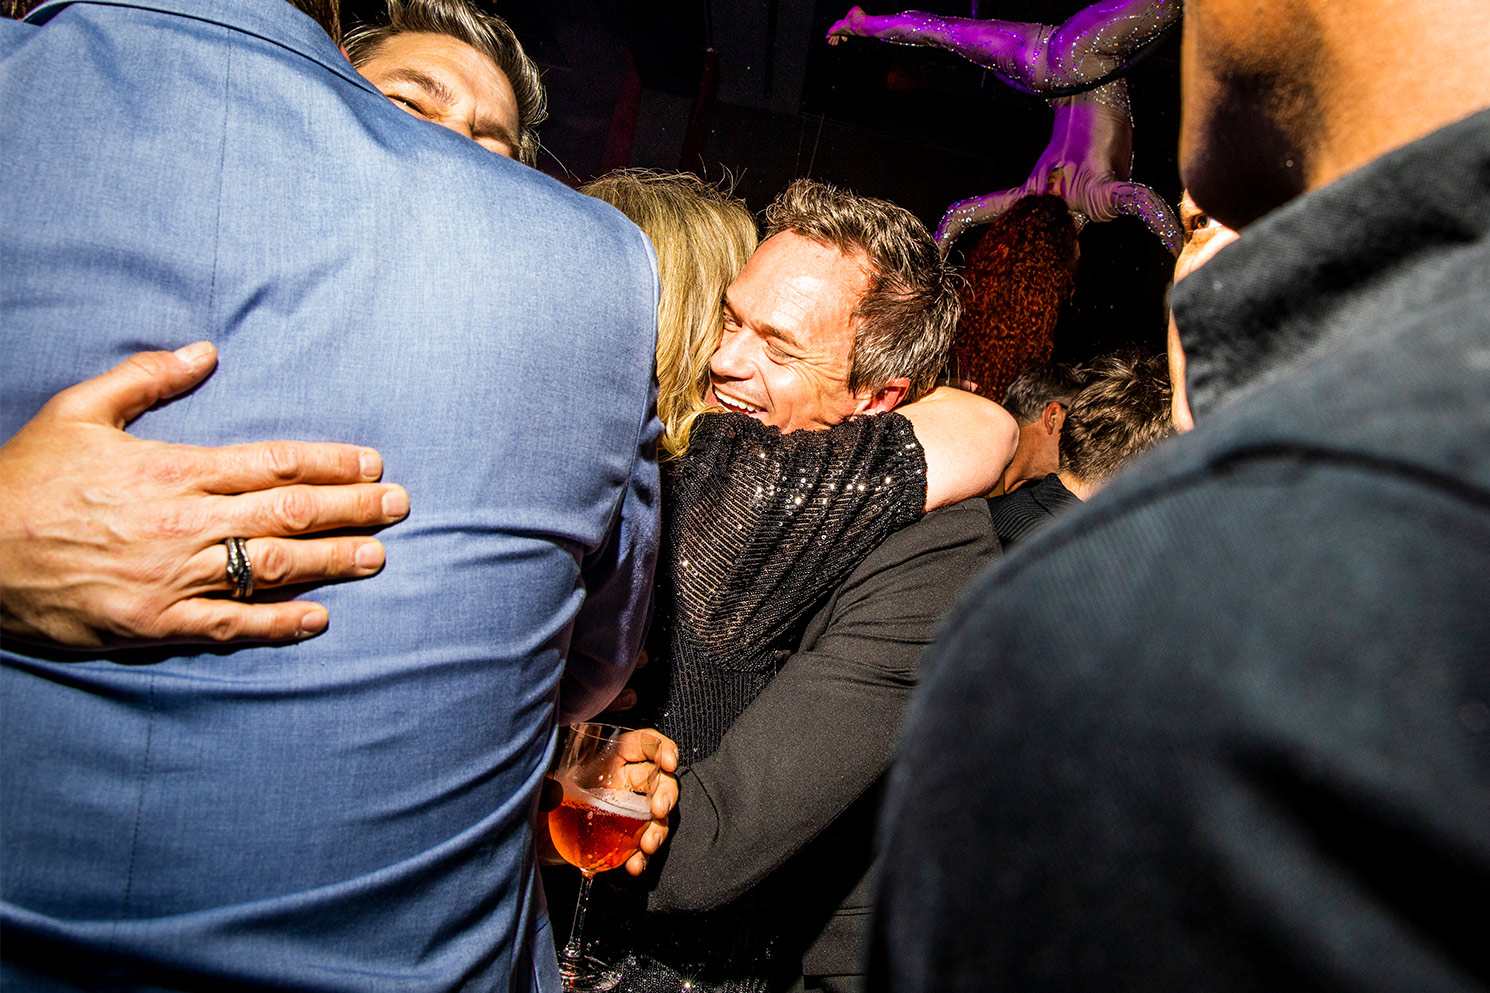 Neil Patrick Harris hugging friend and smiling in group at his 50th birthday party